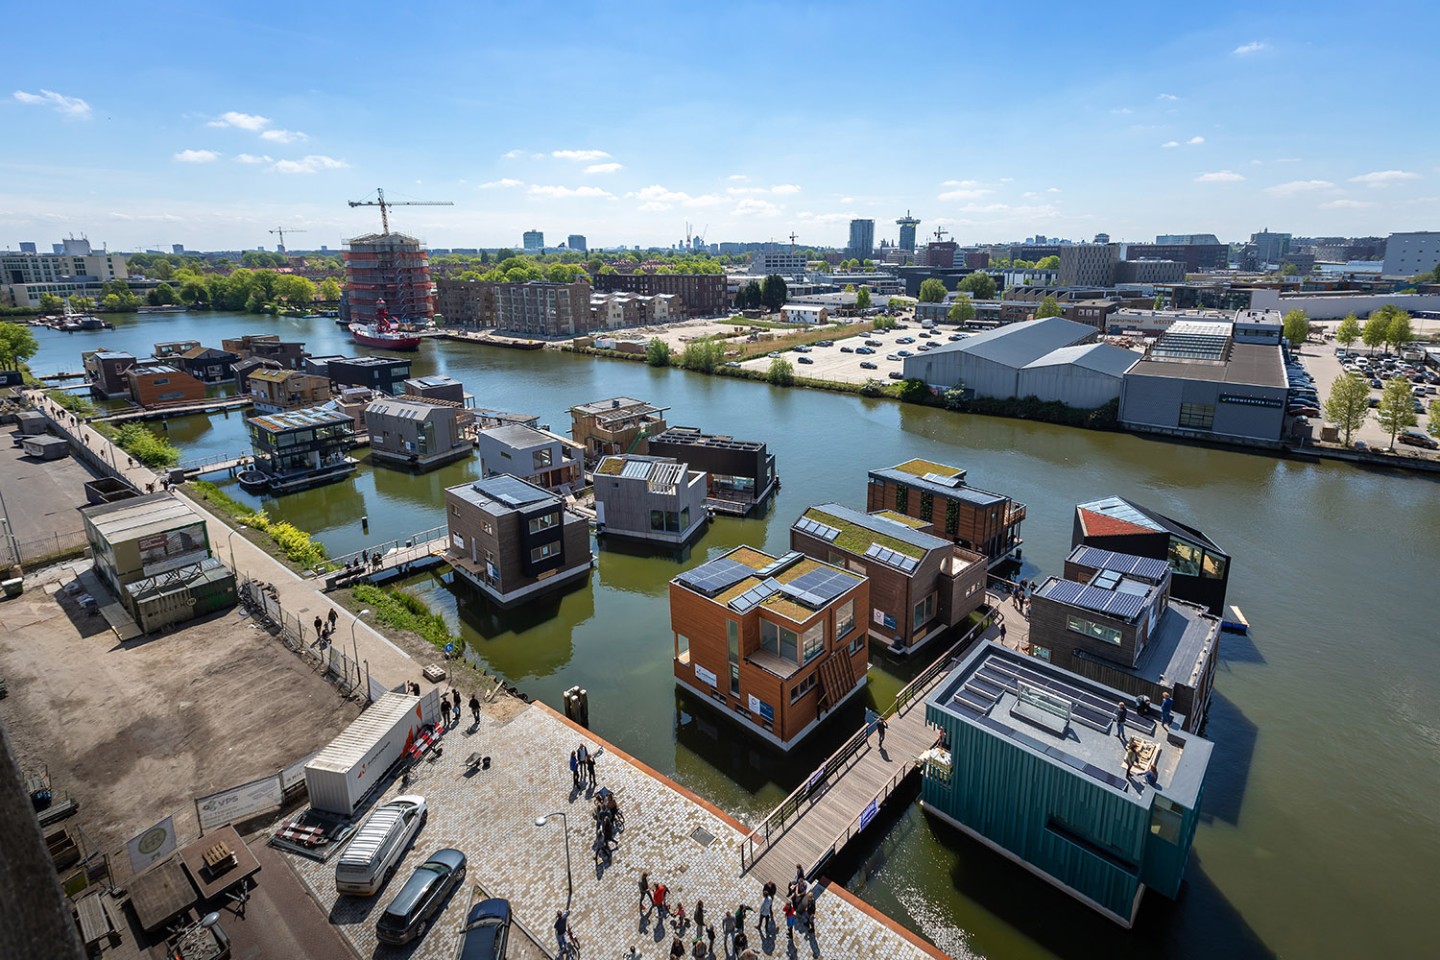 Featuring wood, glass and synthetics, the award-winning architecture of Amsterdam’s floating homes is certainly an eye-catcher. Their innovative energy management system is no less compelling.